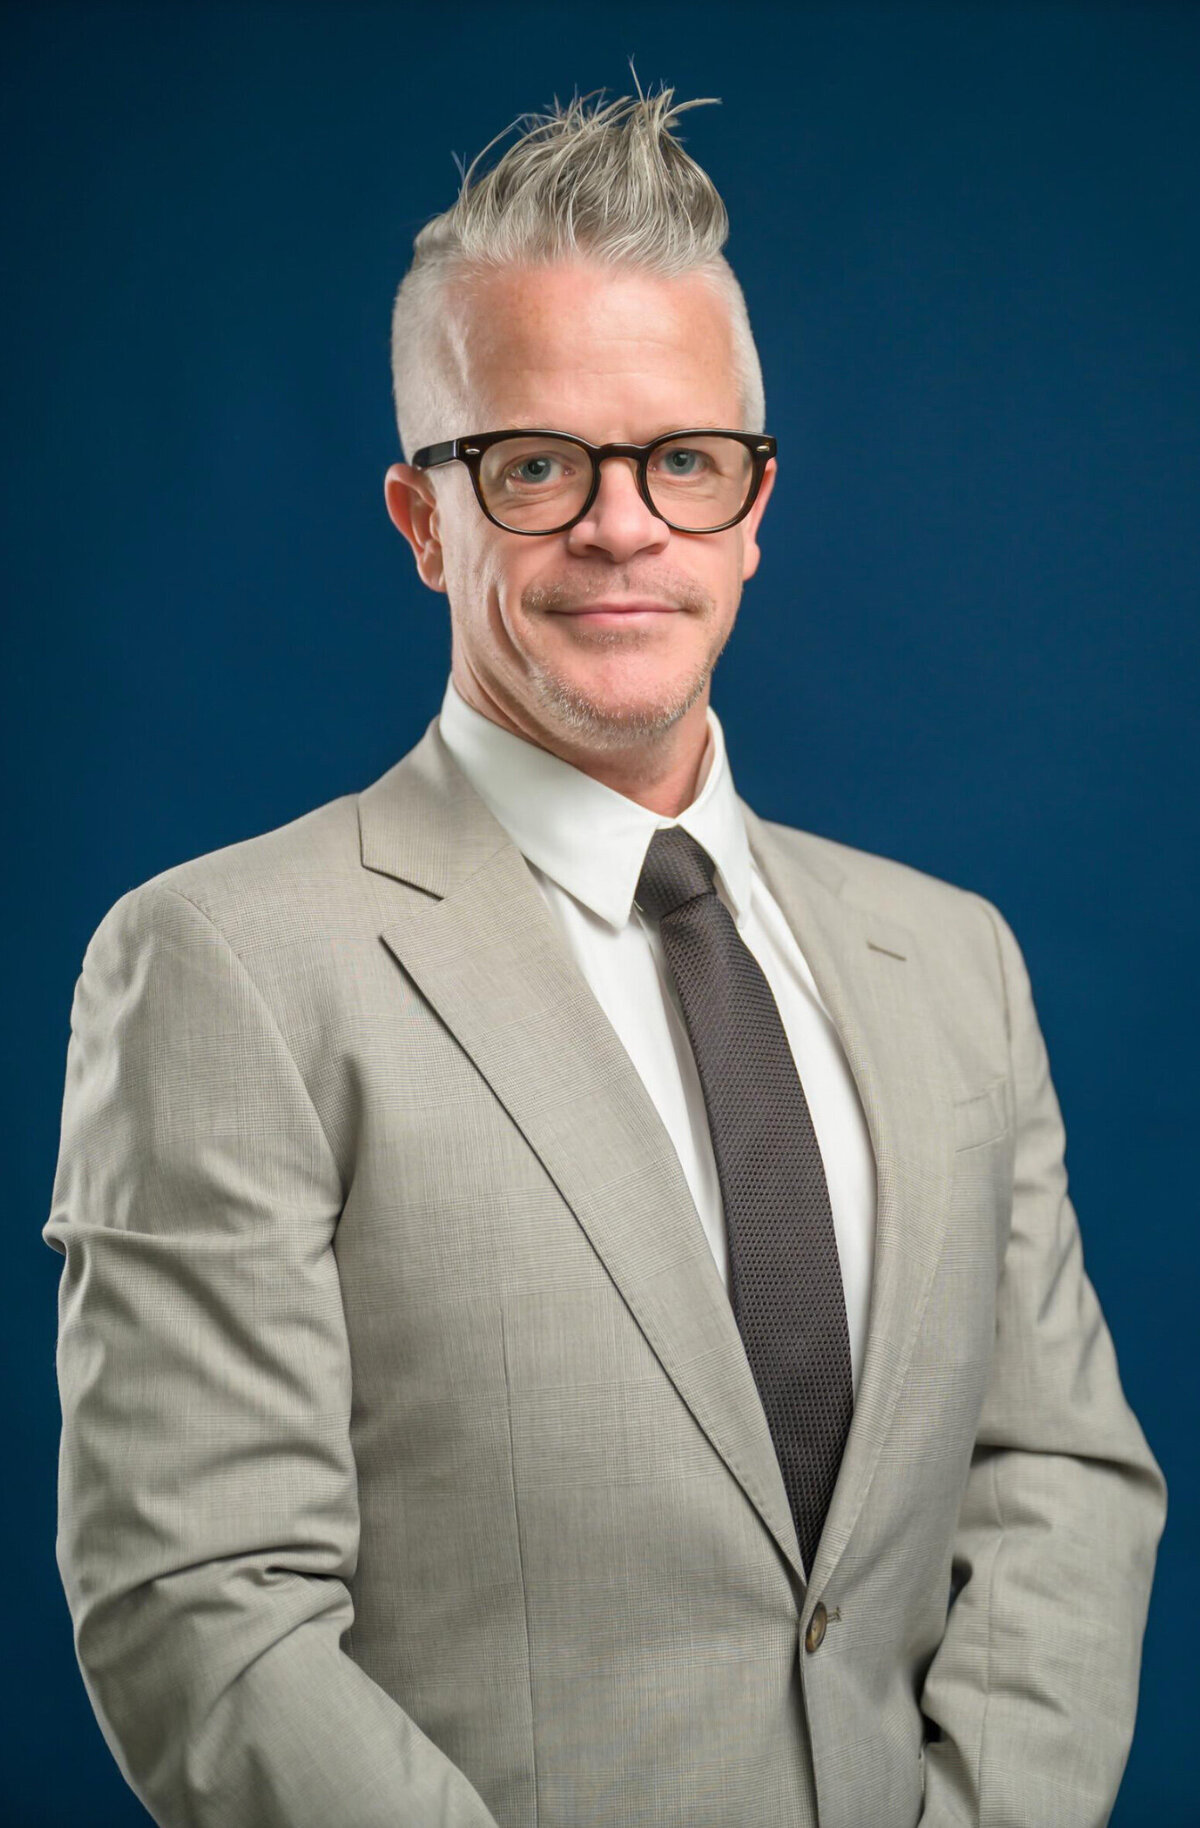 Man with spiky gray hair, wearing a light gray suit posing for a headshot in front of a blue background